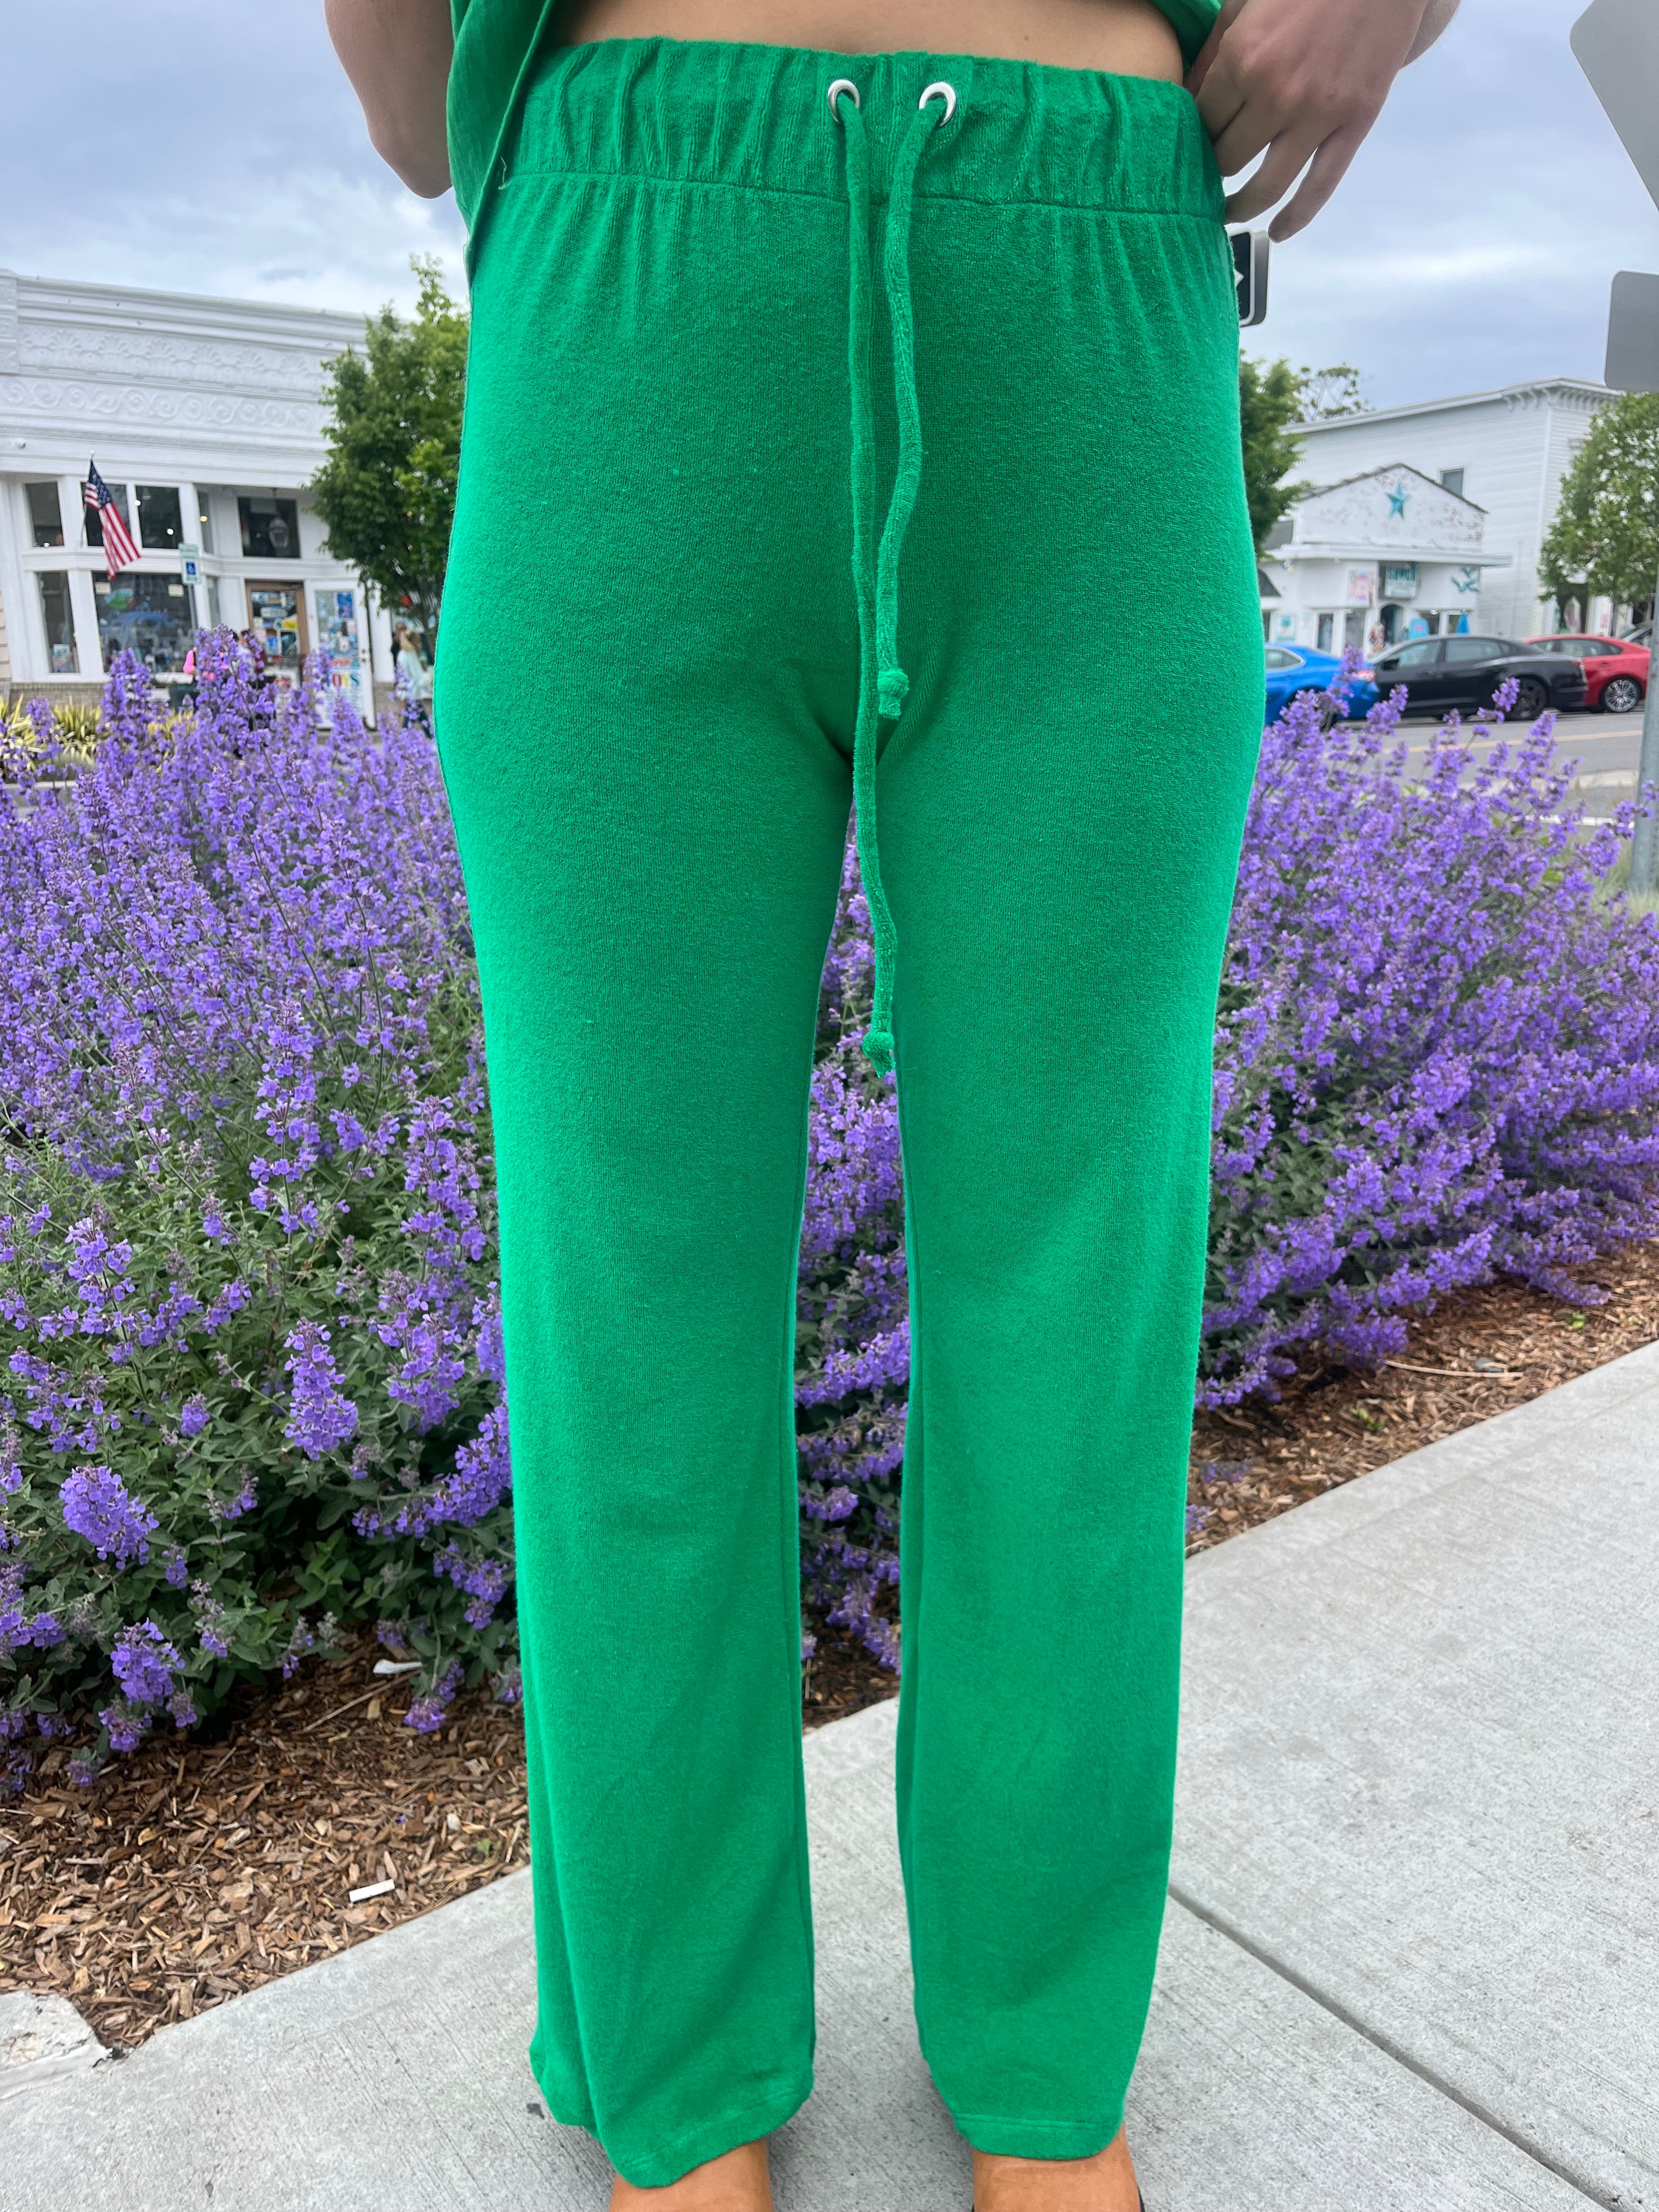 Terry Lounge Pant